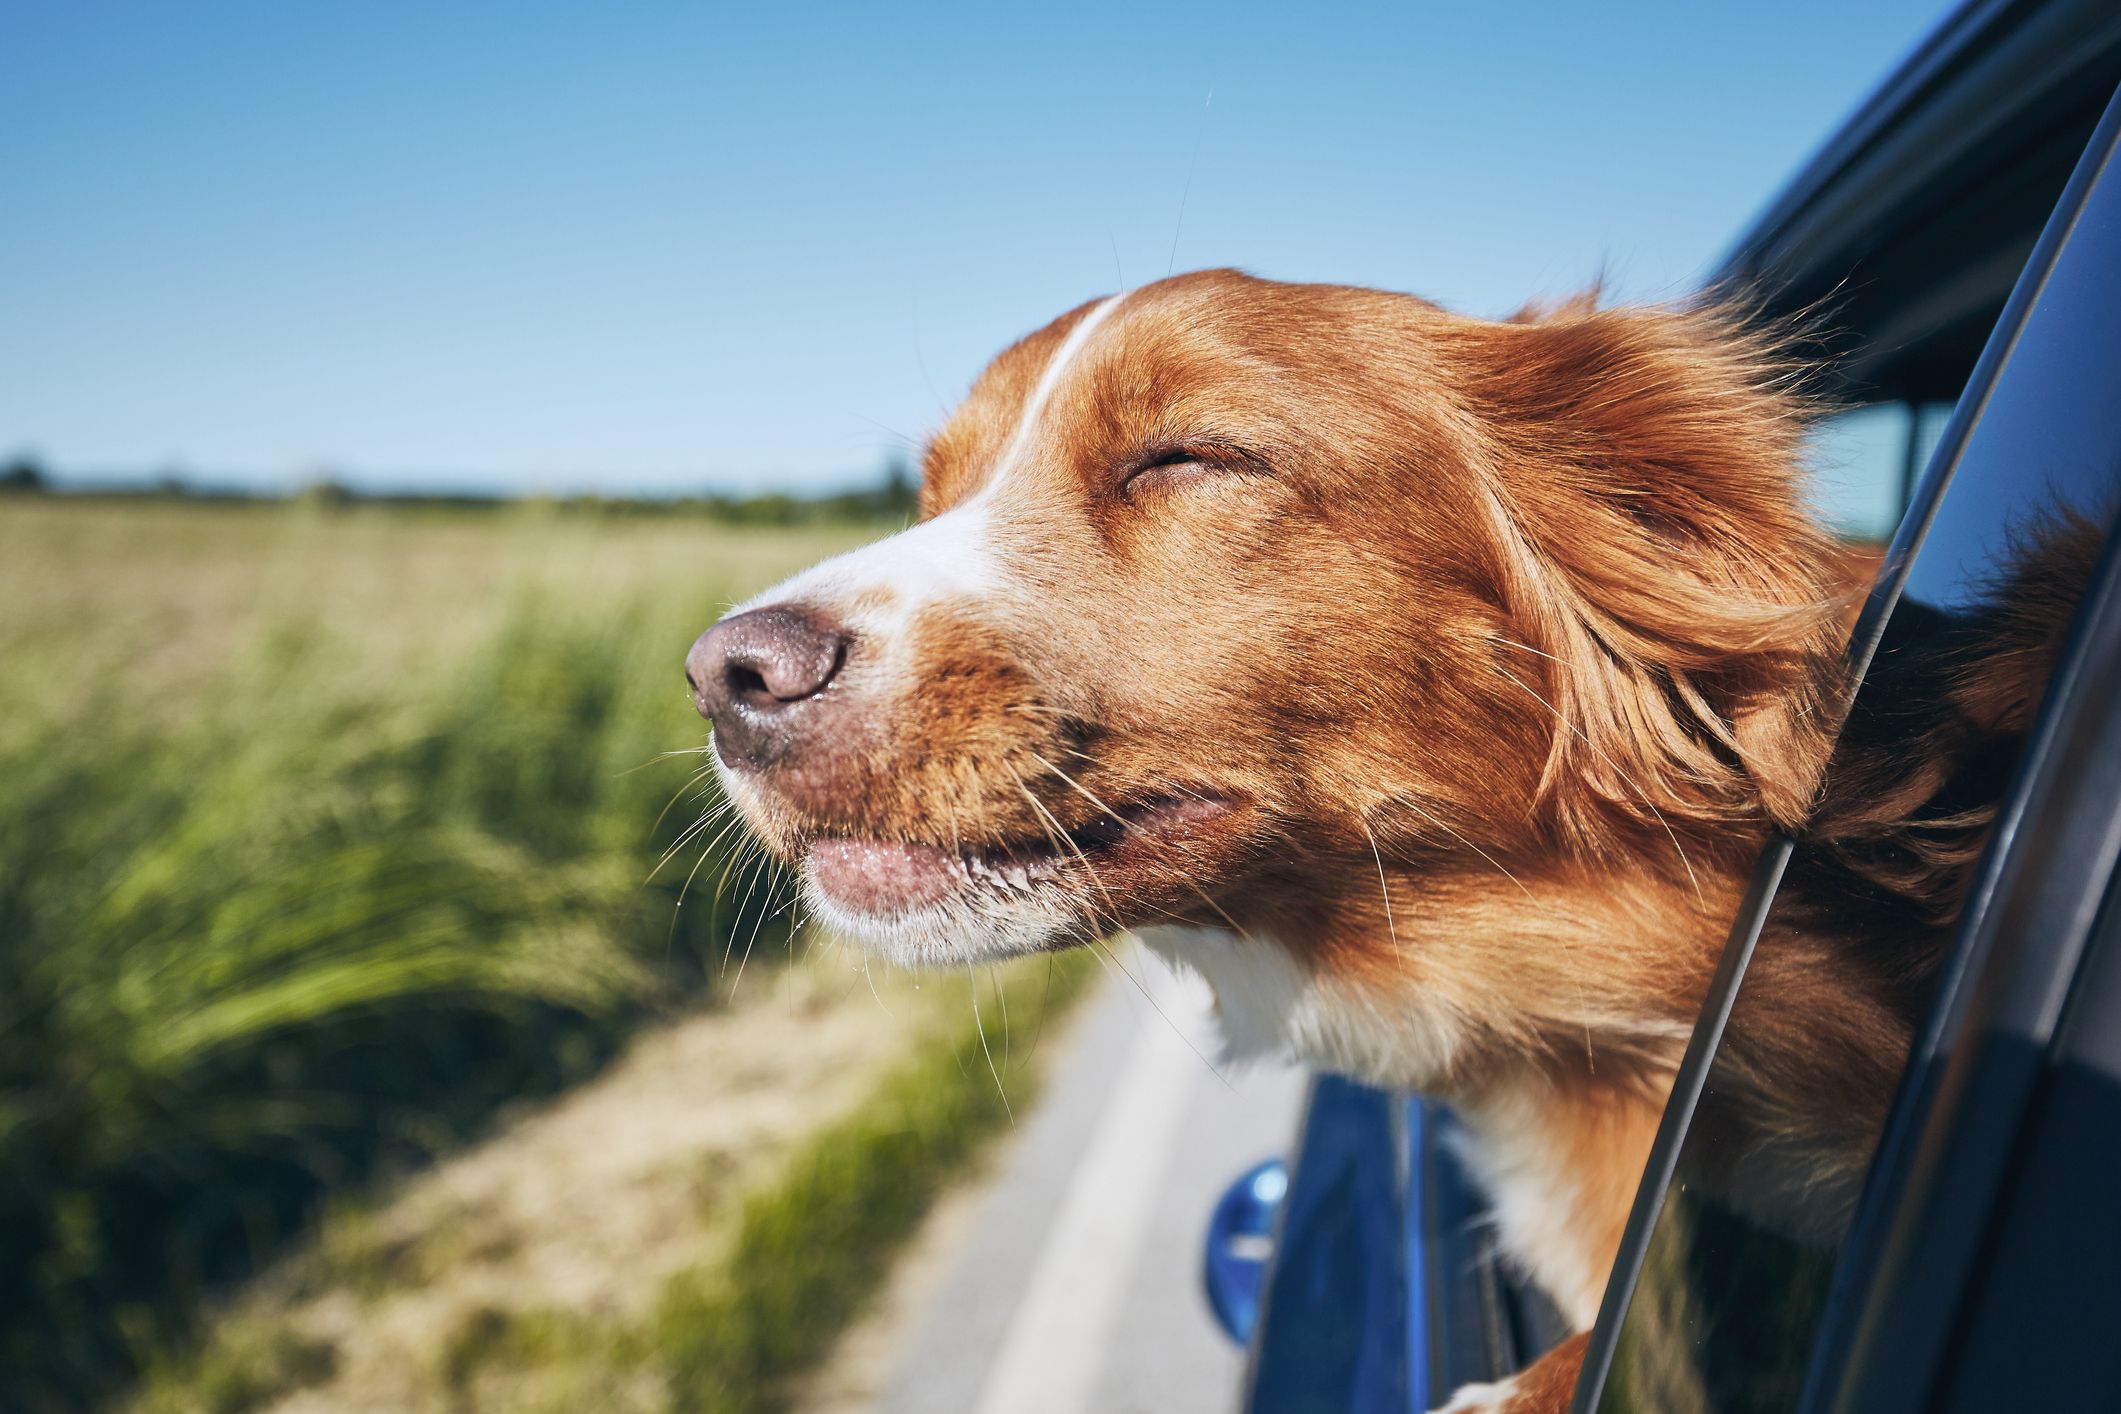 Owners Urged To Safely Secure Dogs When Driving To Avoid Fine